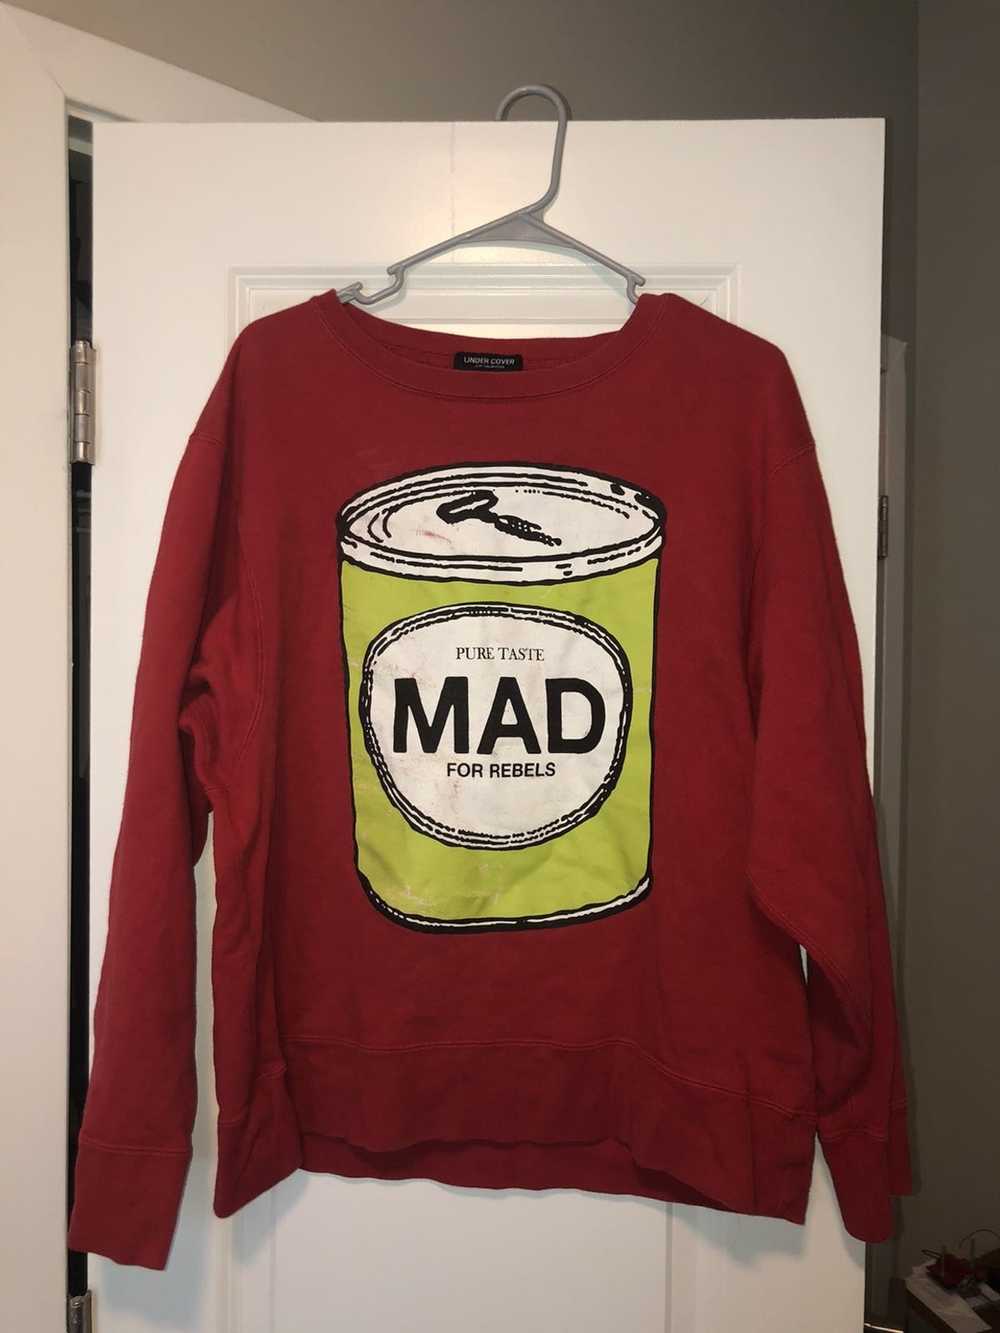 Undercover Undercover Mad For Rebels Sweatshirt - image 1